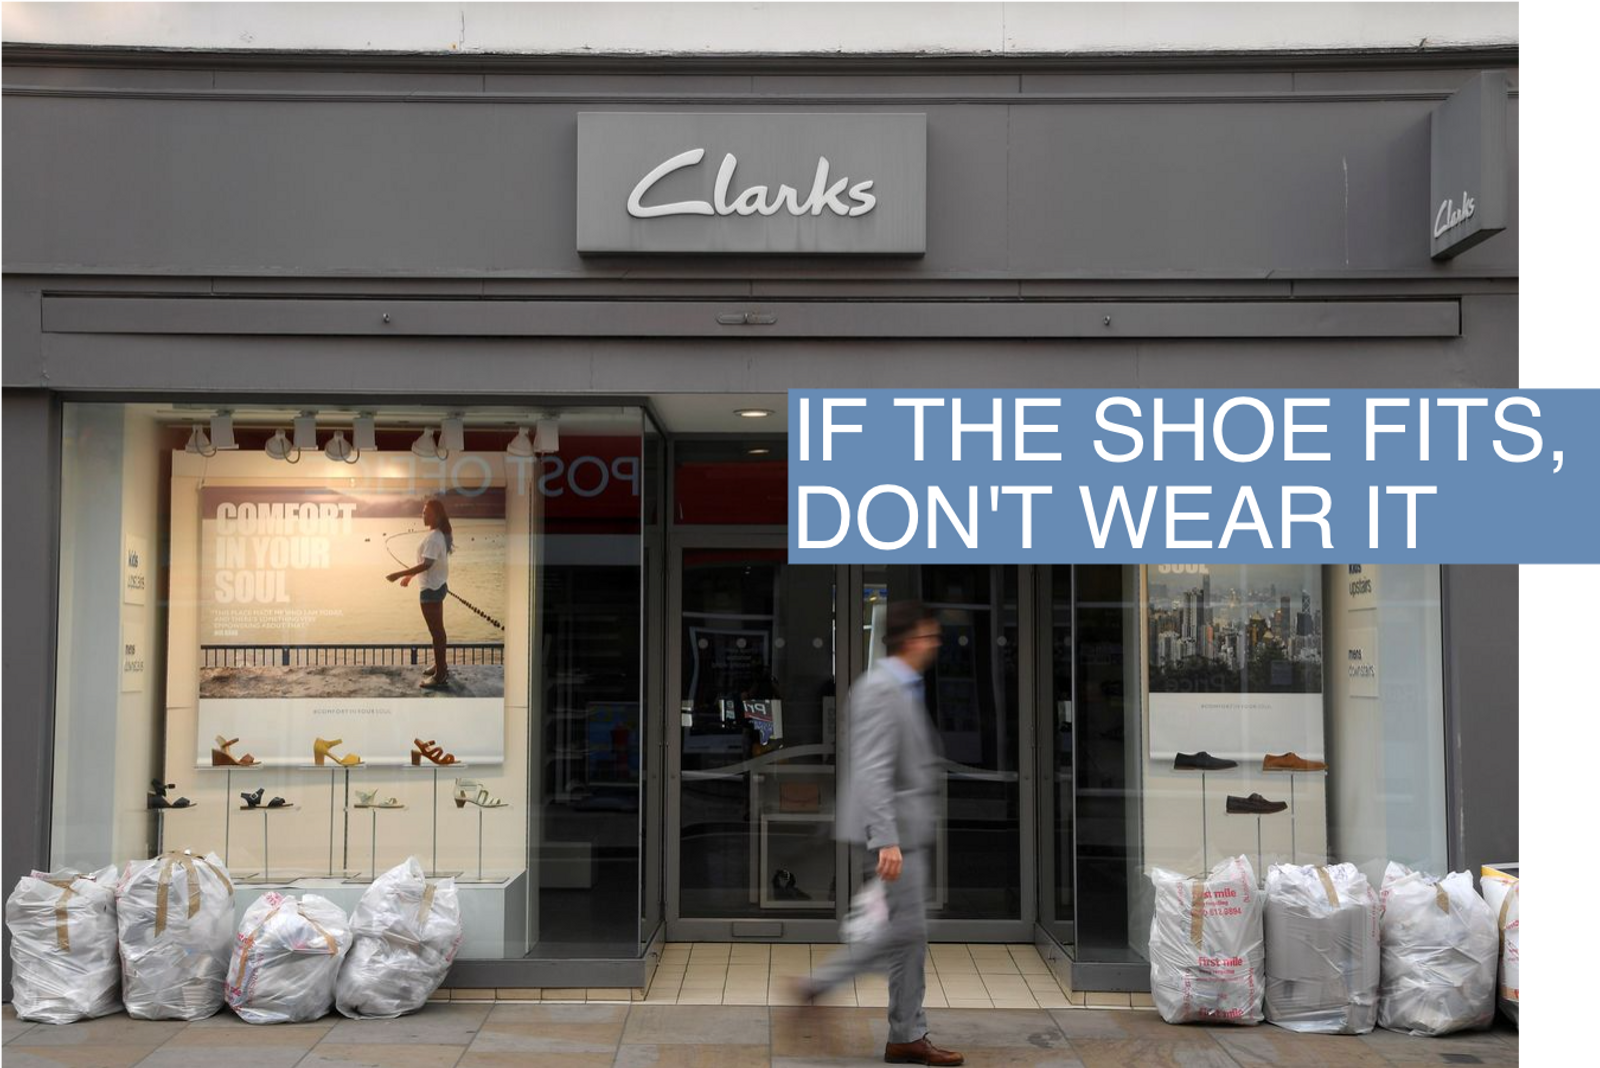 A man walks past a Clarks shoe shop in west London, Britain, May 21, 2018